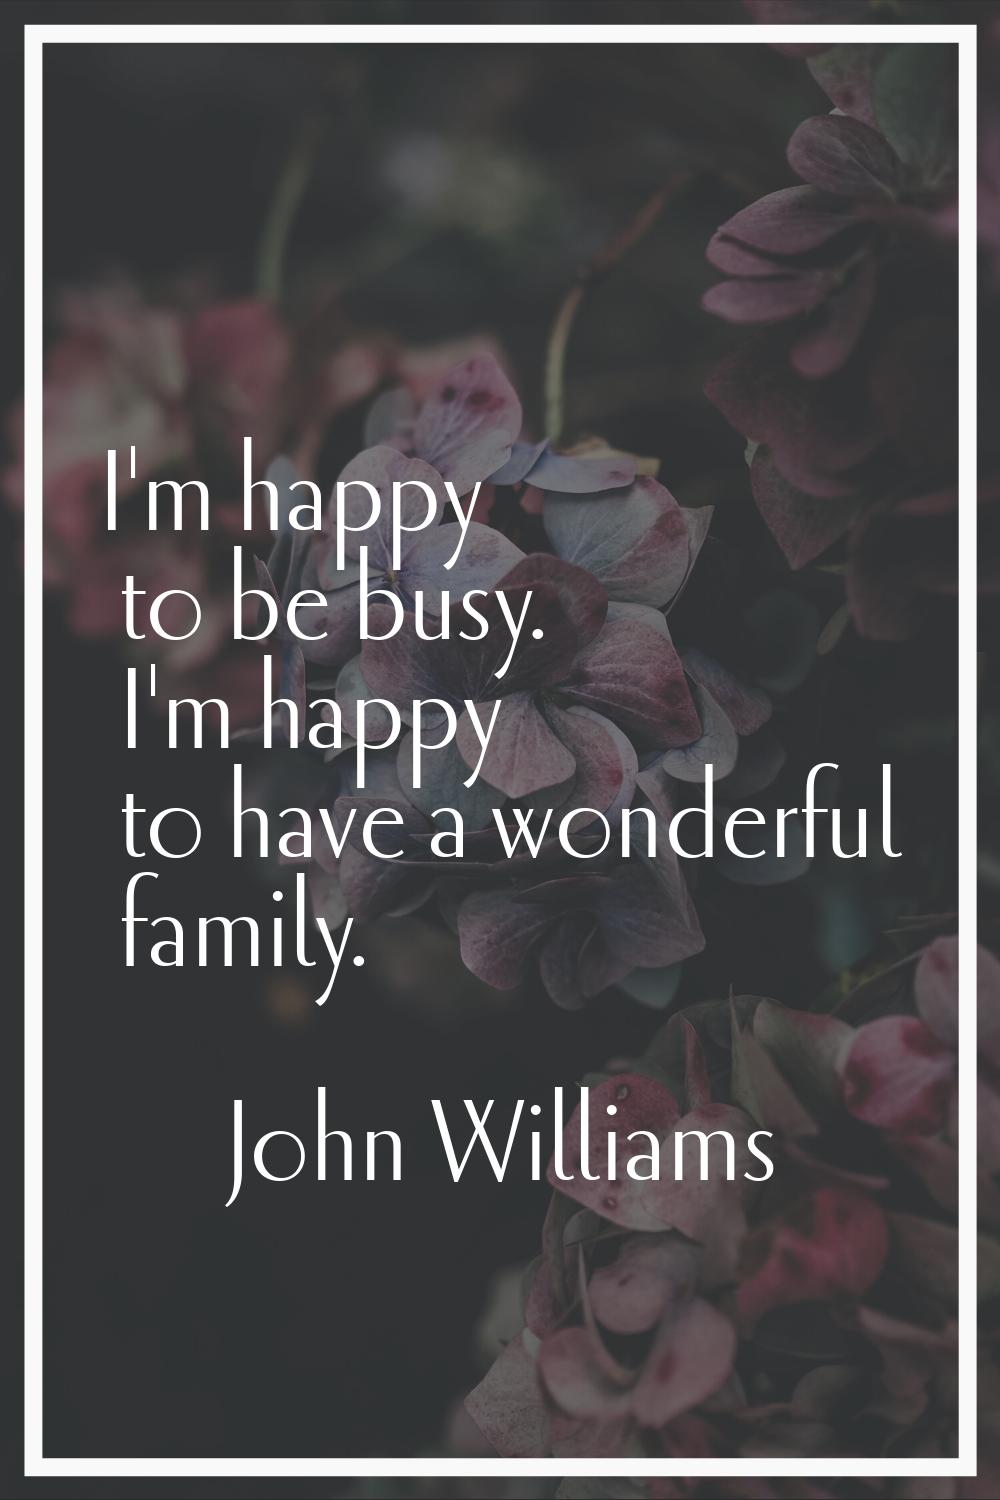 I'm happy to be busy. I'm happy to have a wonderful family.